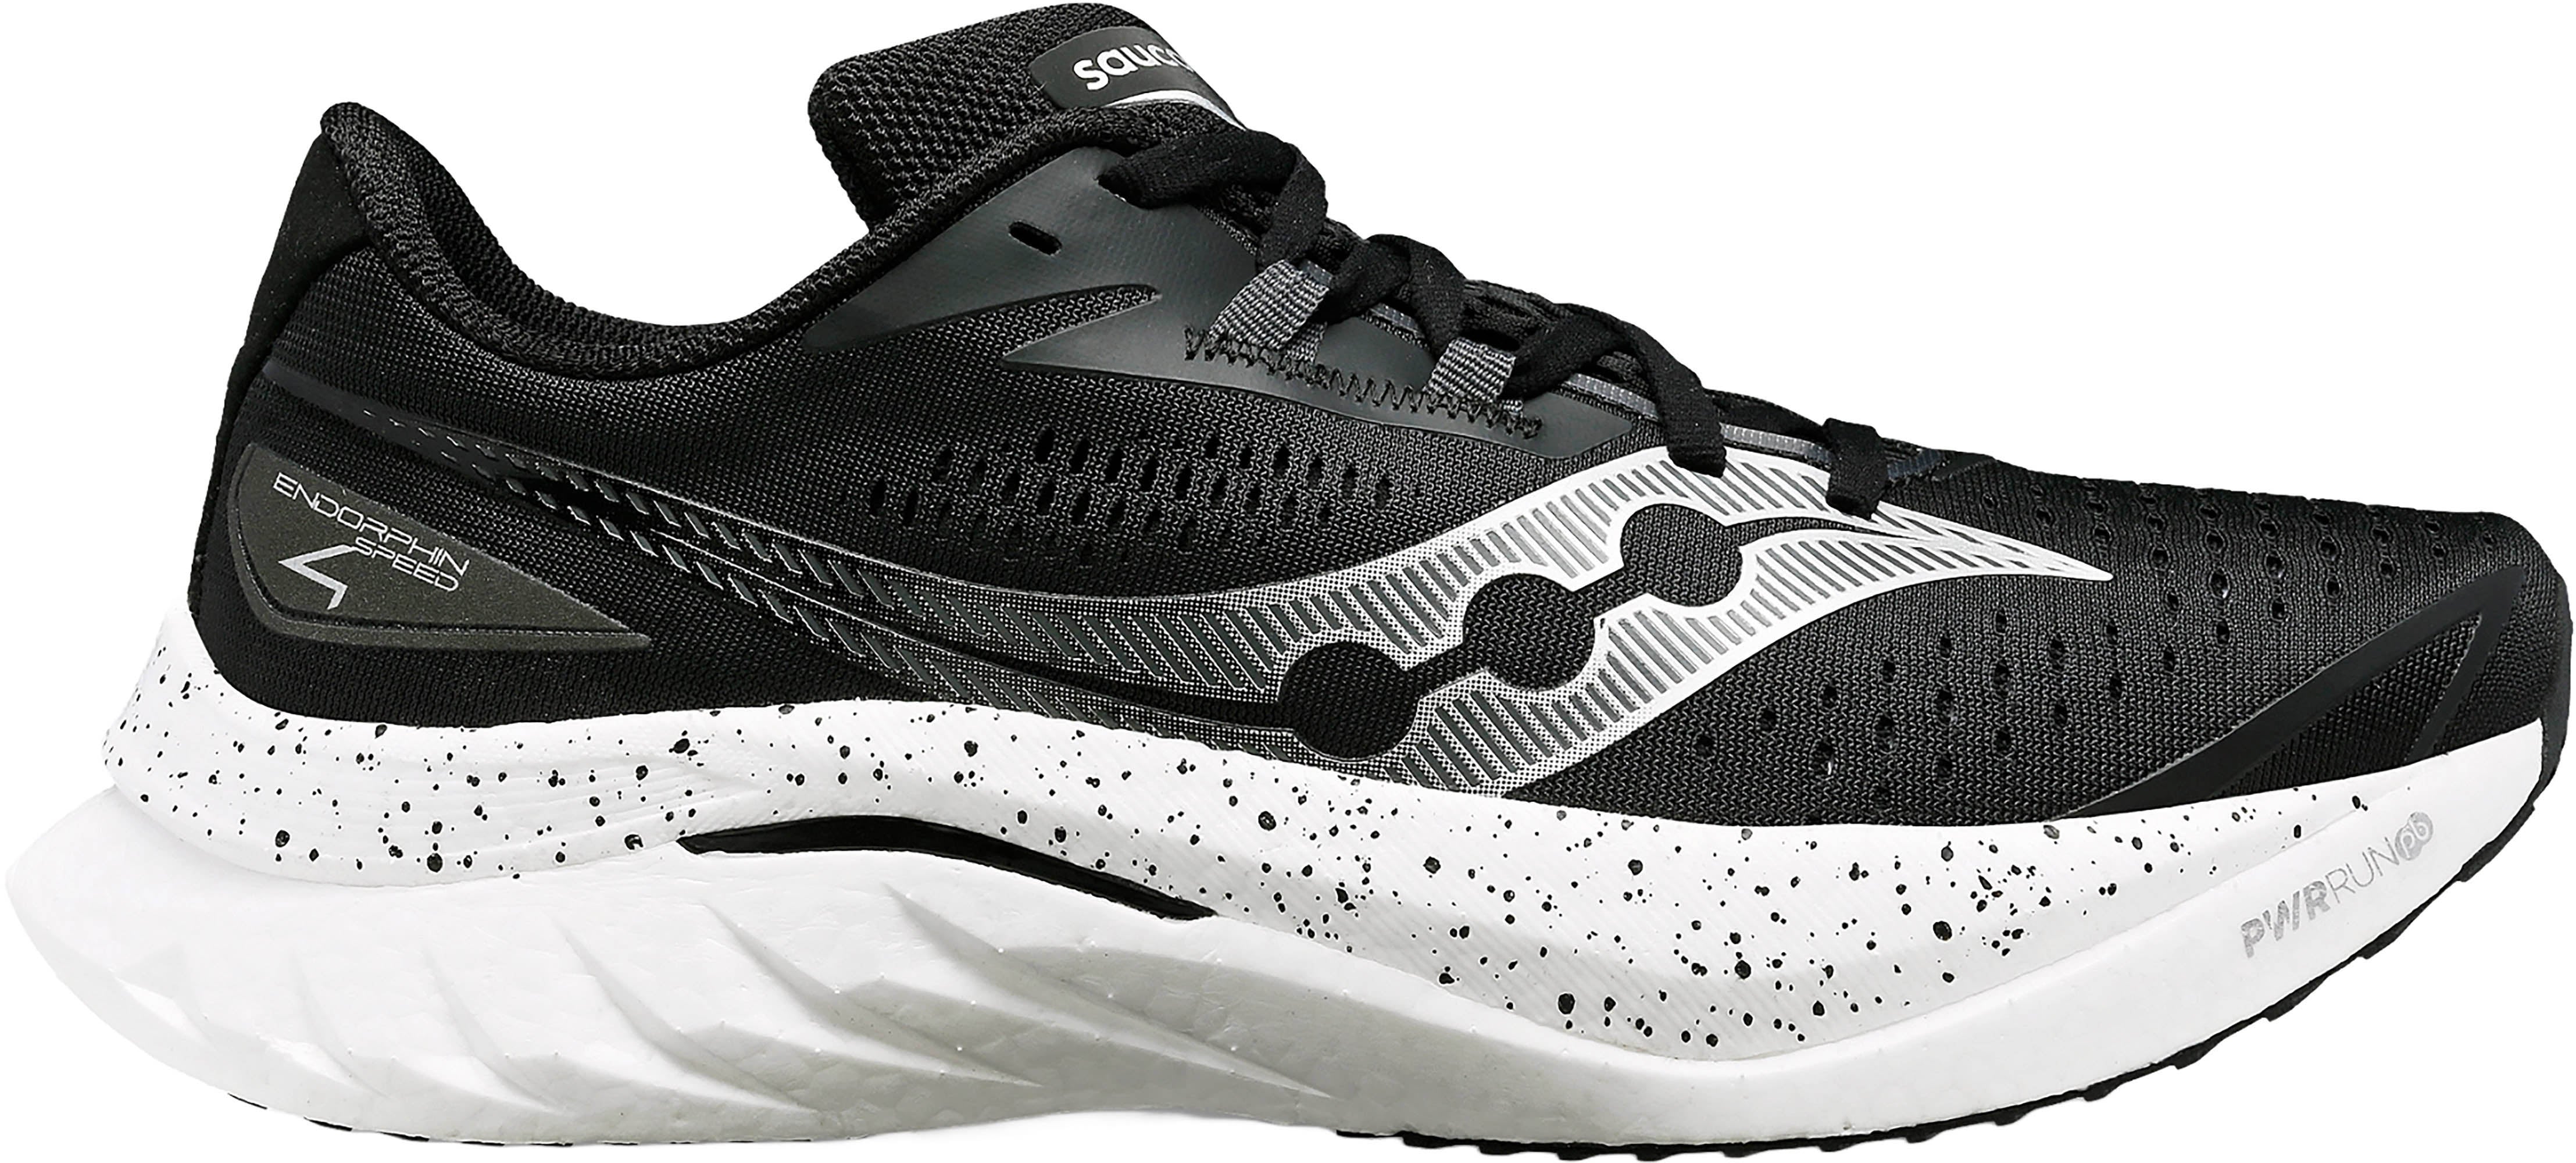 Saucony Endorphin Speed 4 Running Shoes - Men's | Altitude Sports